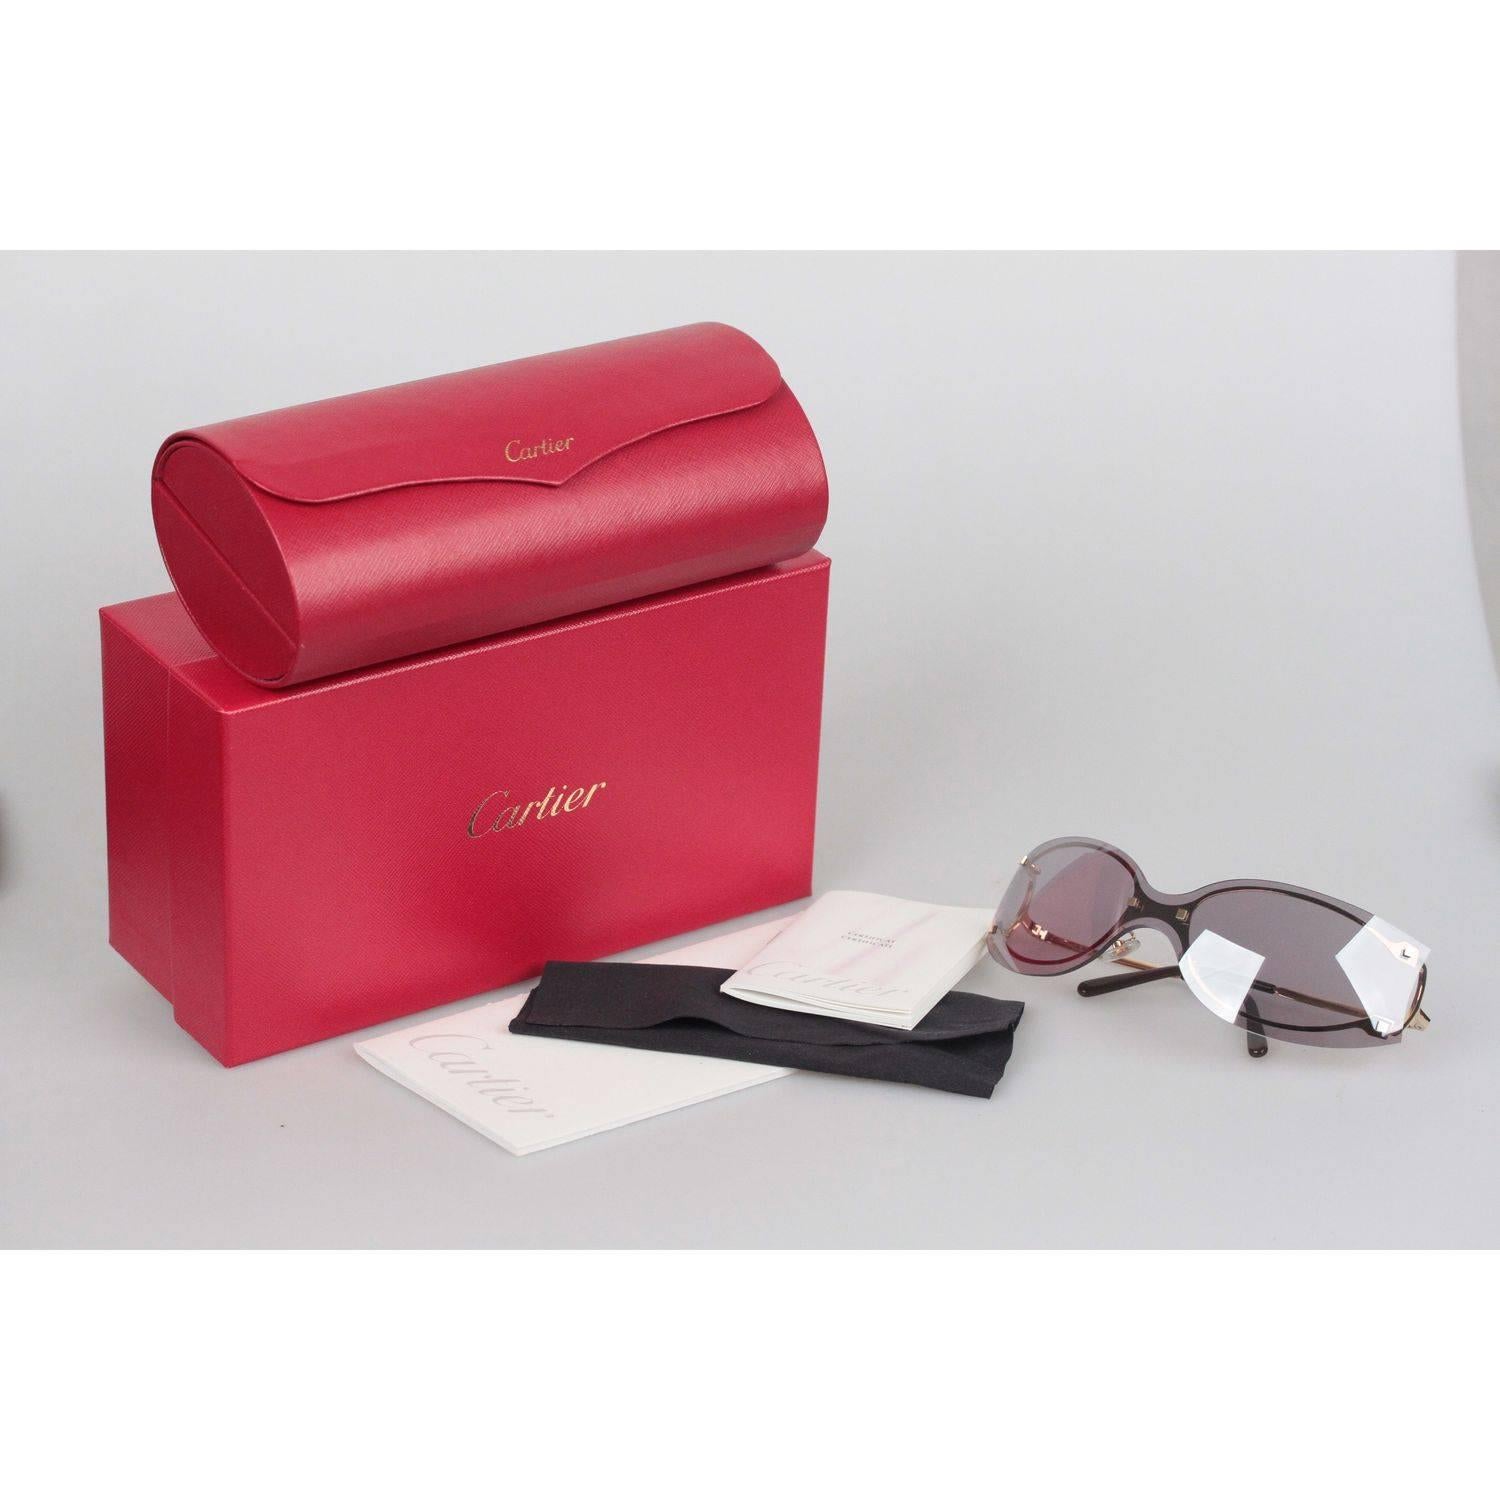 Elegant Rimless Sunglasses by Cartier
Gold frame, Pink original CARTIER lens (CC 2 incision on the side of the right lens)
Made in France
Measurements:
- TEMPLE MAX. LENGTH: 110 mm
- TEMPLE TO TEMPLE - MAX WIDTH: 135 mm
- EYE / LENS MAX. WIDTH: -